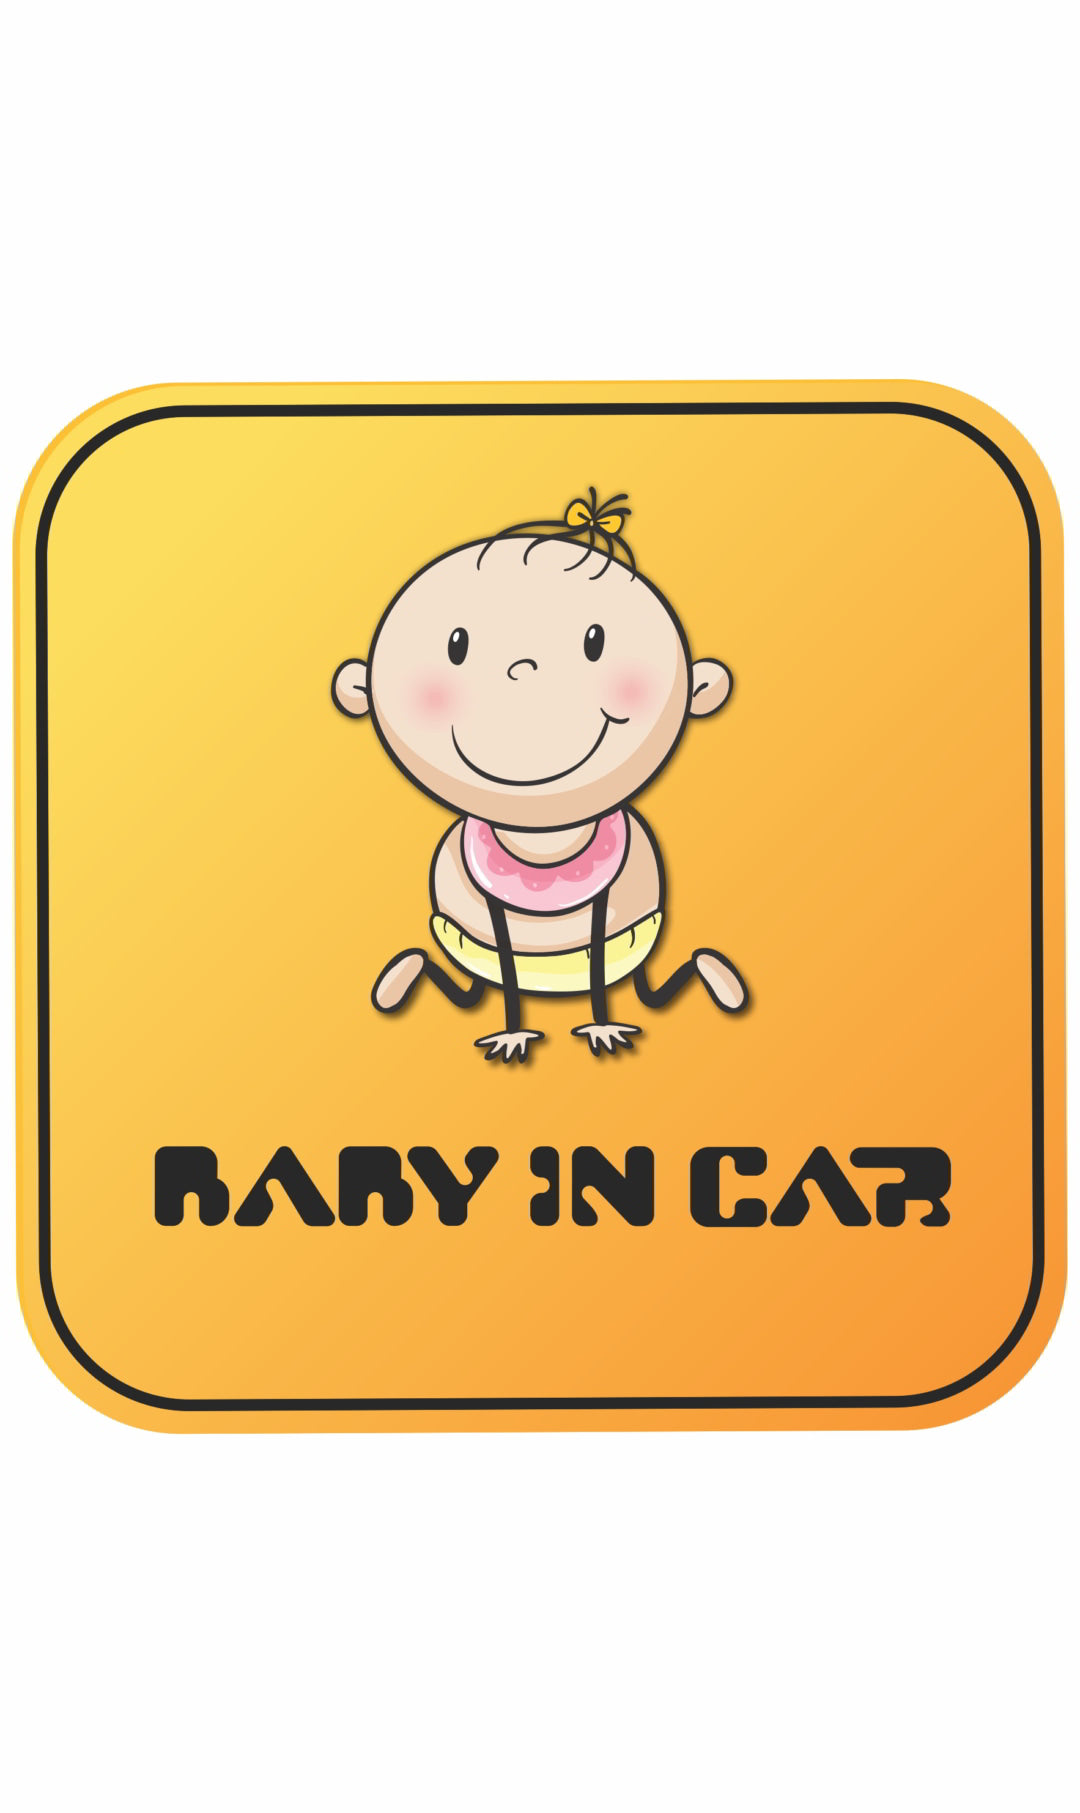 BABY IN CAR Decal Sticker(2pc)_c10